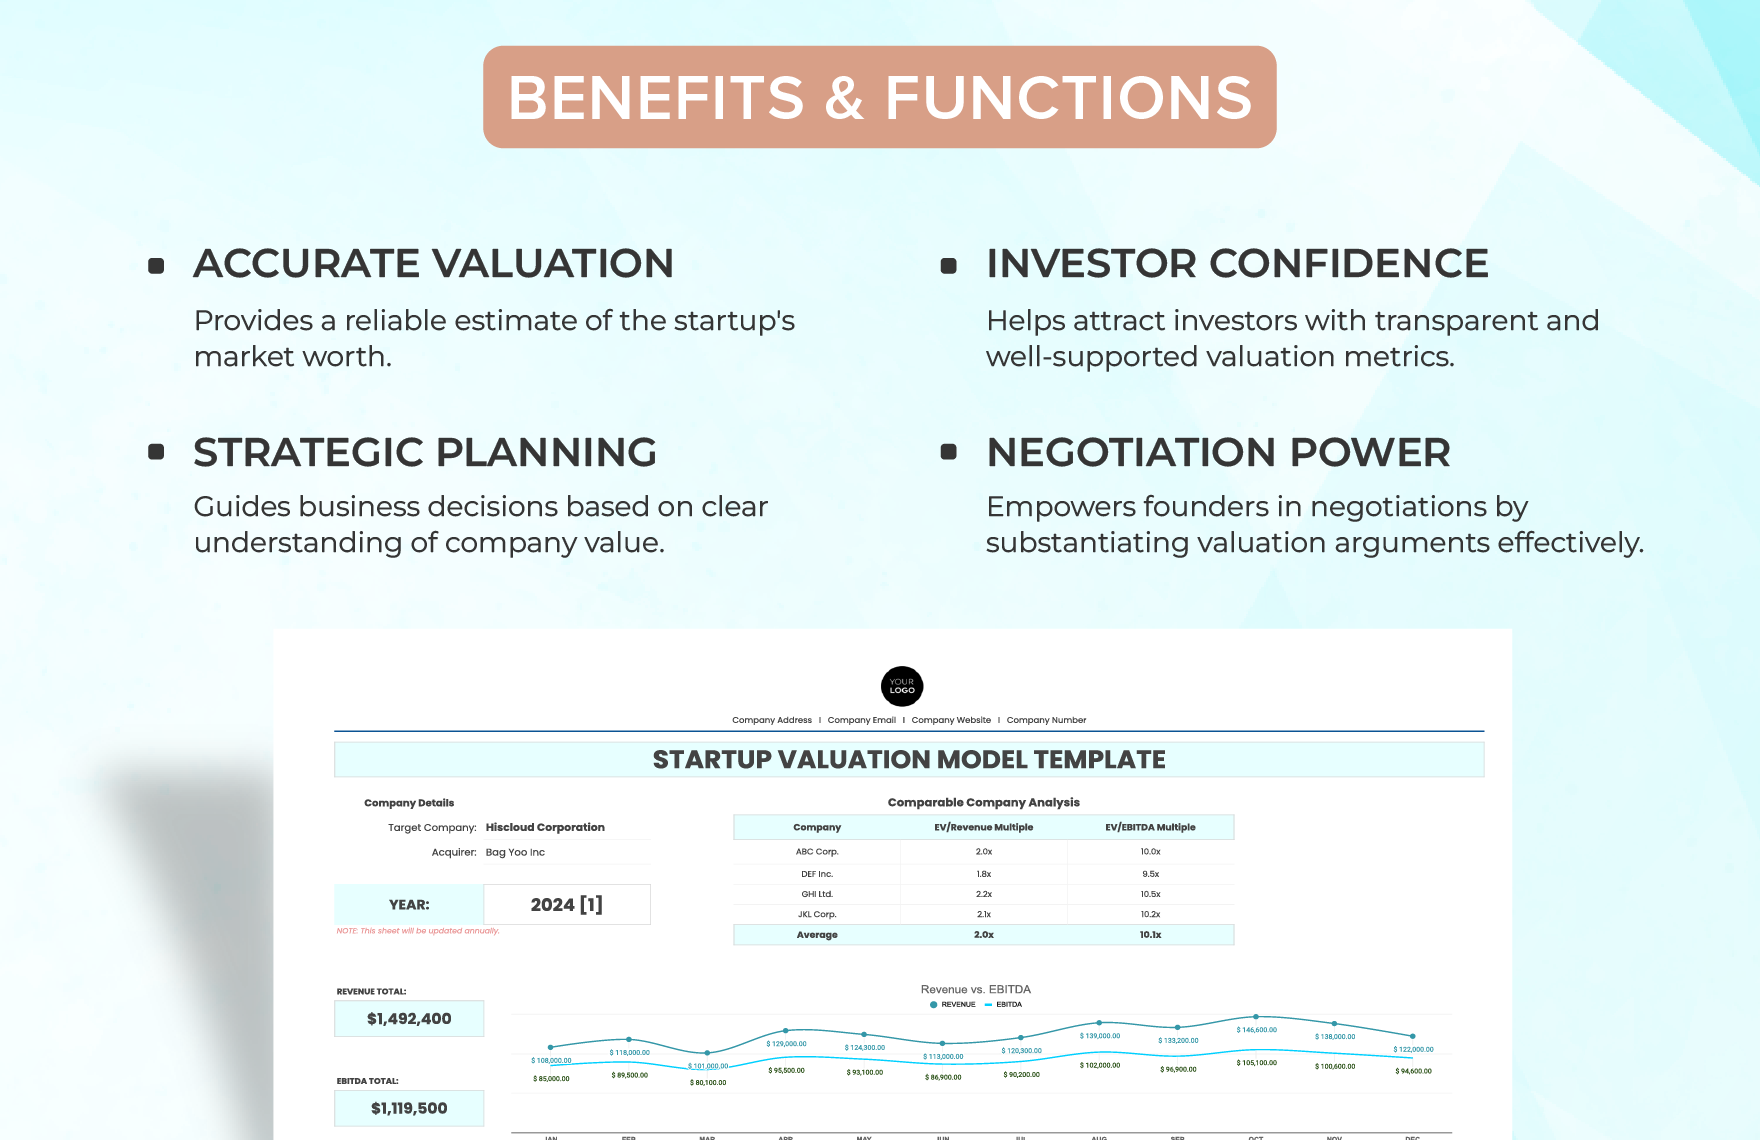 Startup Valuation Model Template